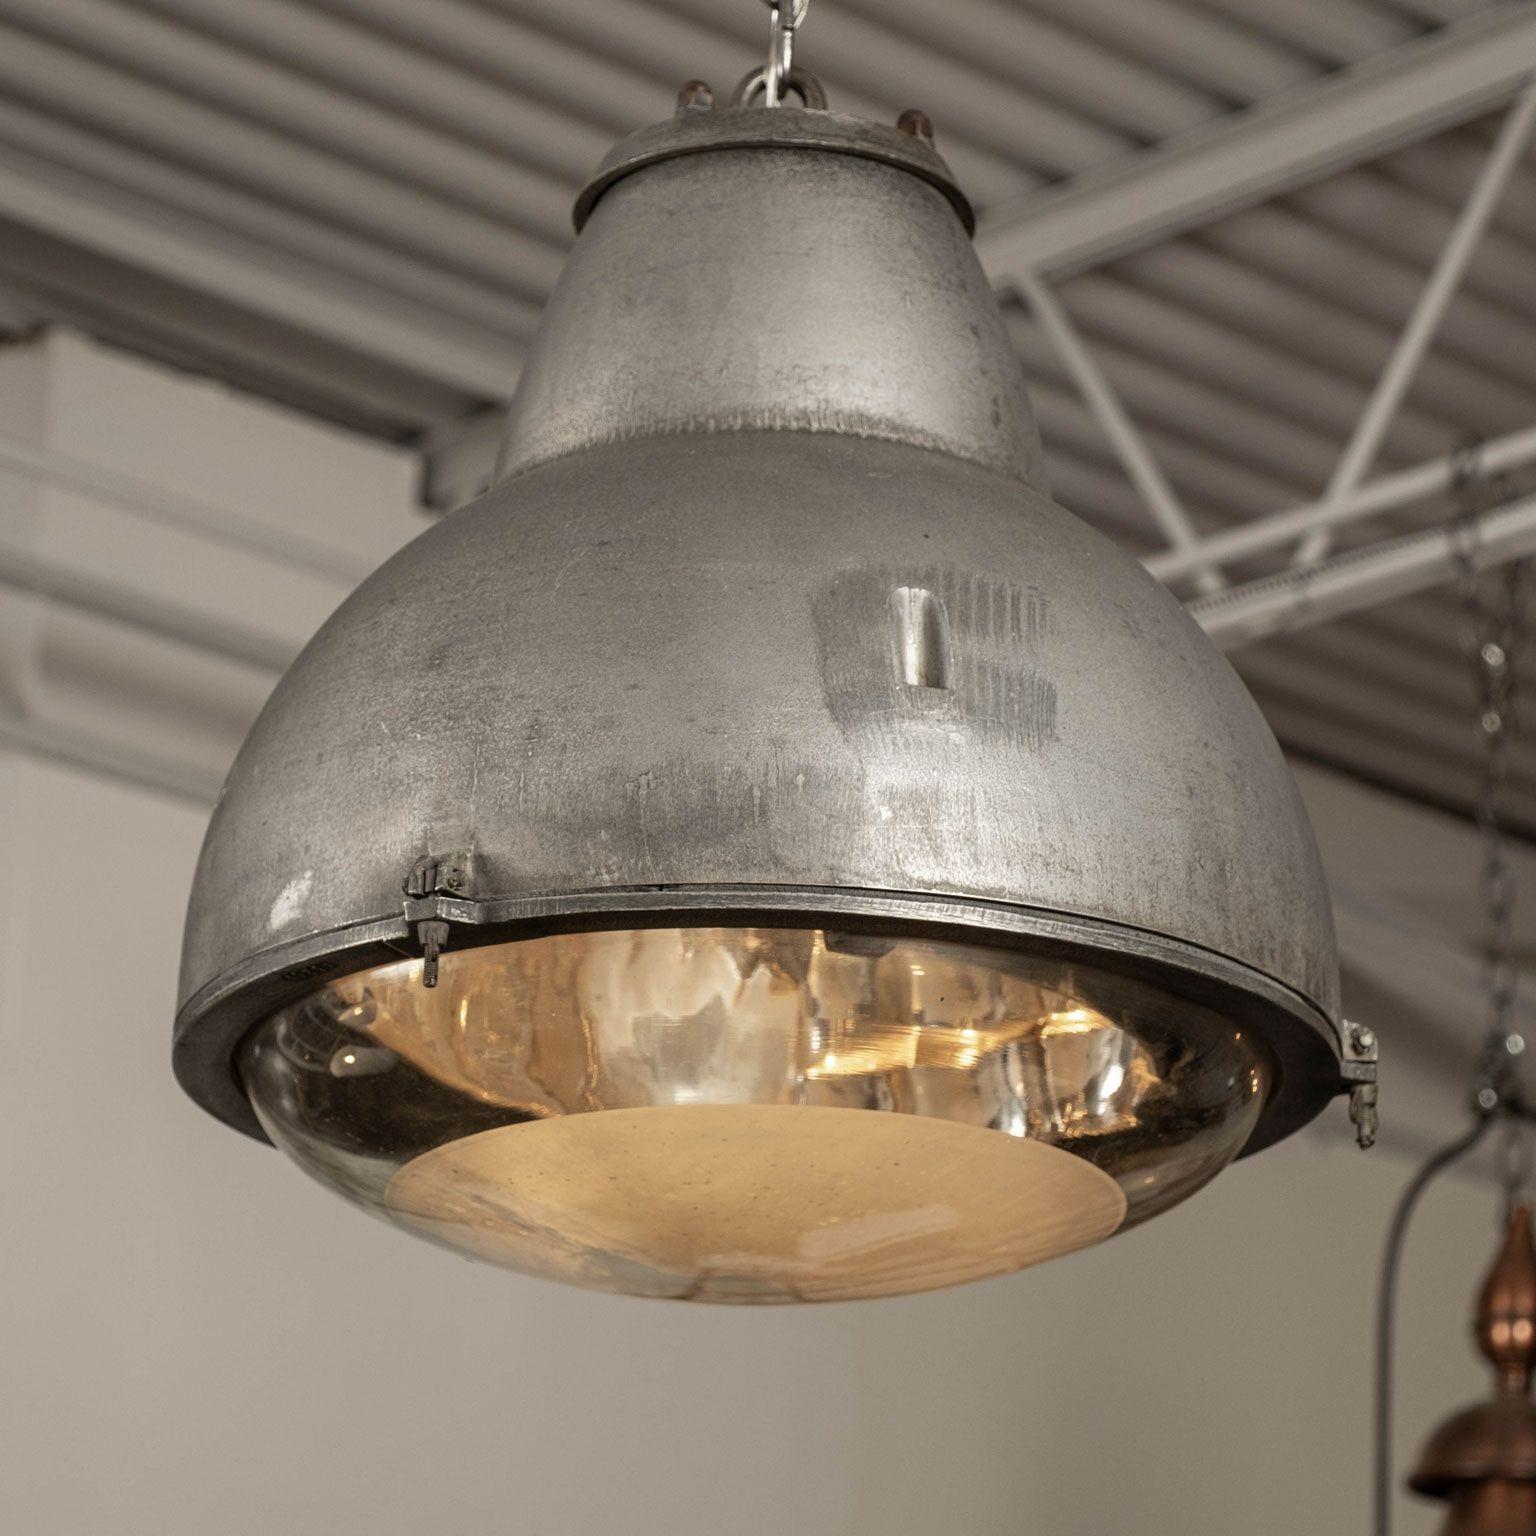 Pair of Large Saunier Duval Pendant Lights In Fair Condition For Sale In Houston, TX